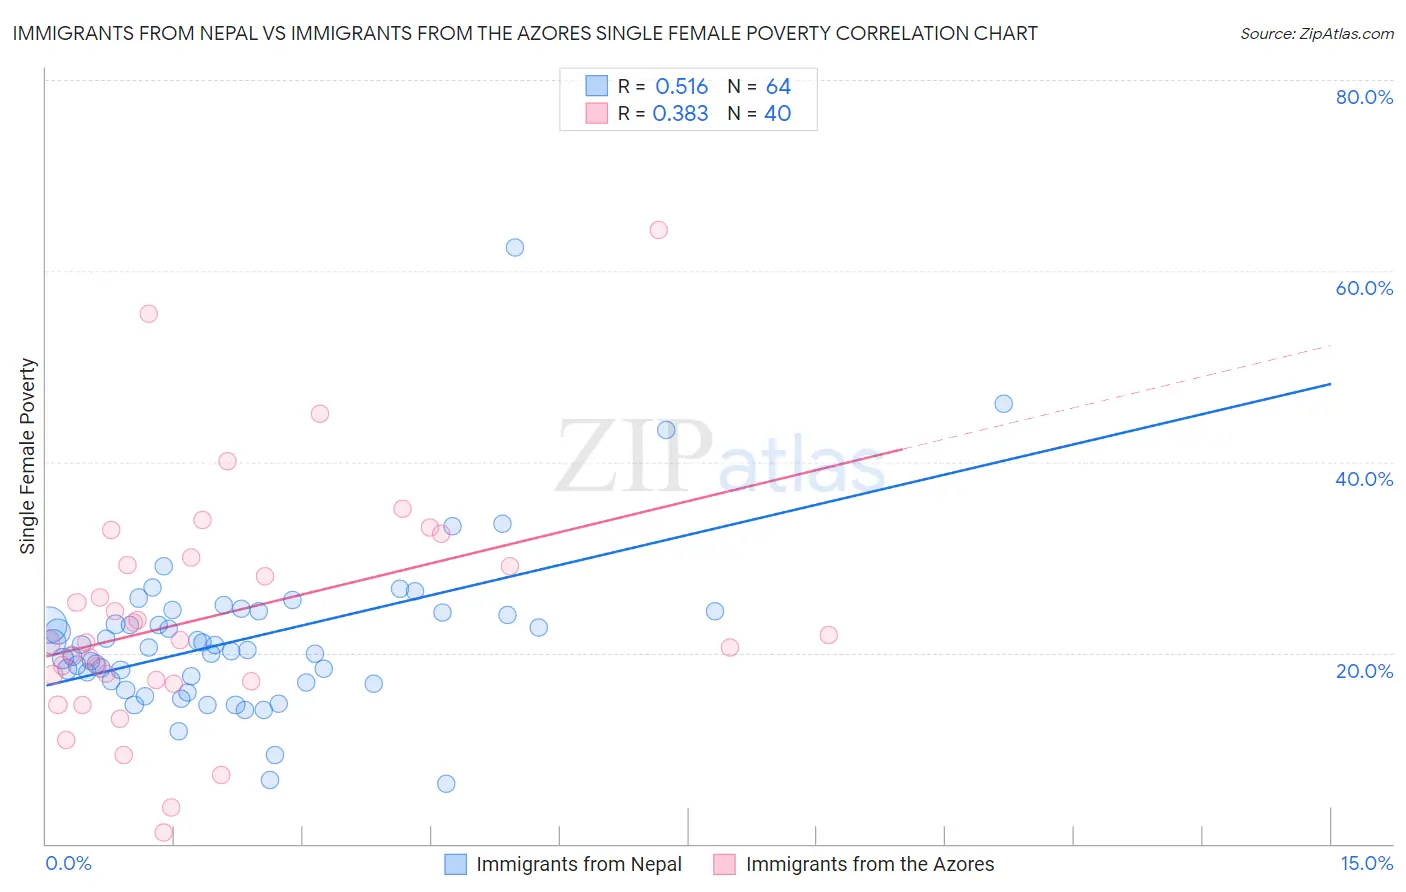 Immigrants from Nepal vs Immigrants from the Azores Single Female Poverty